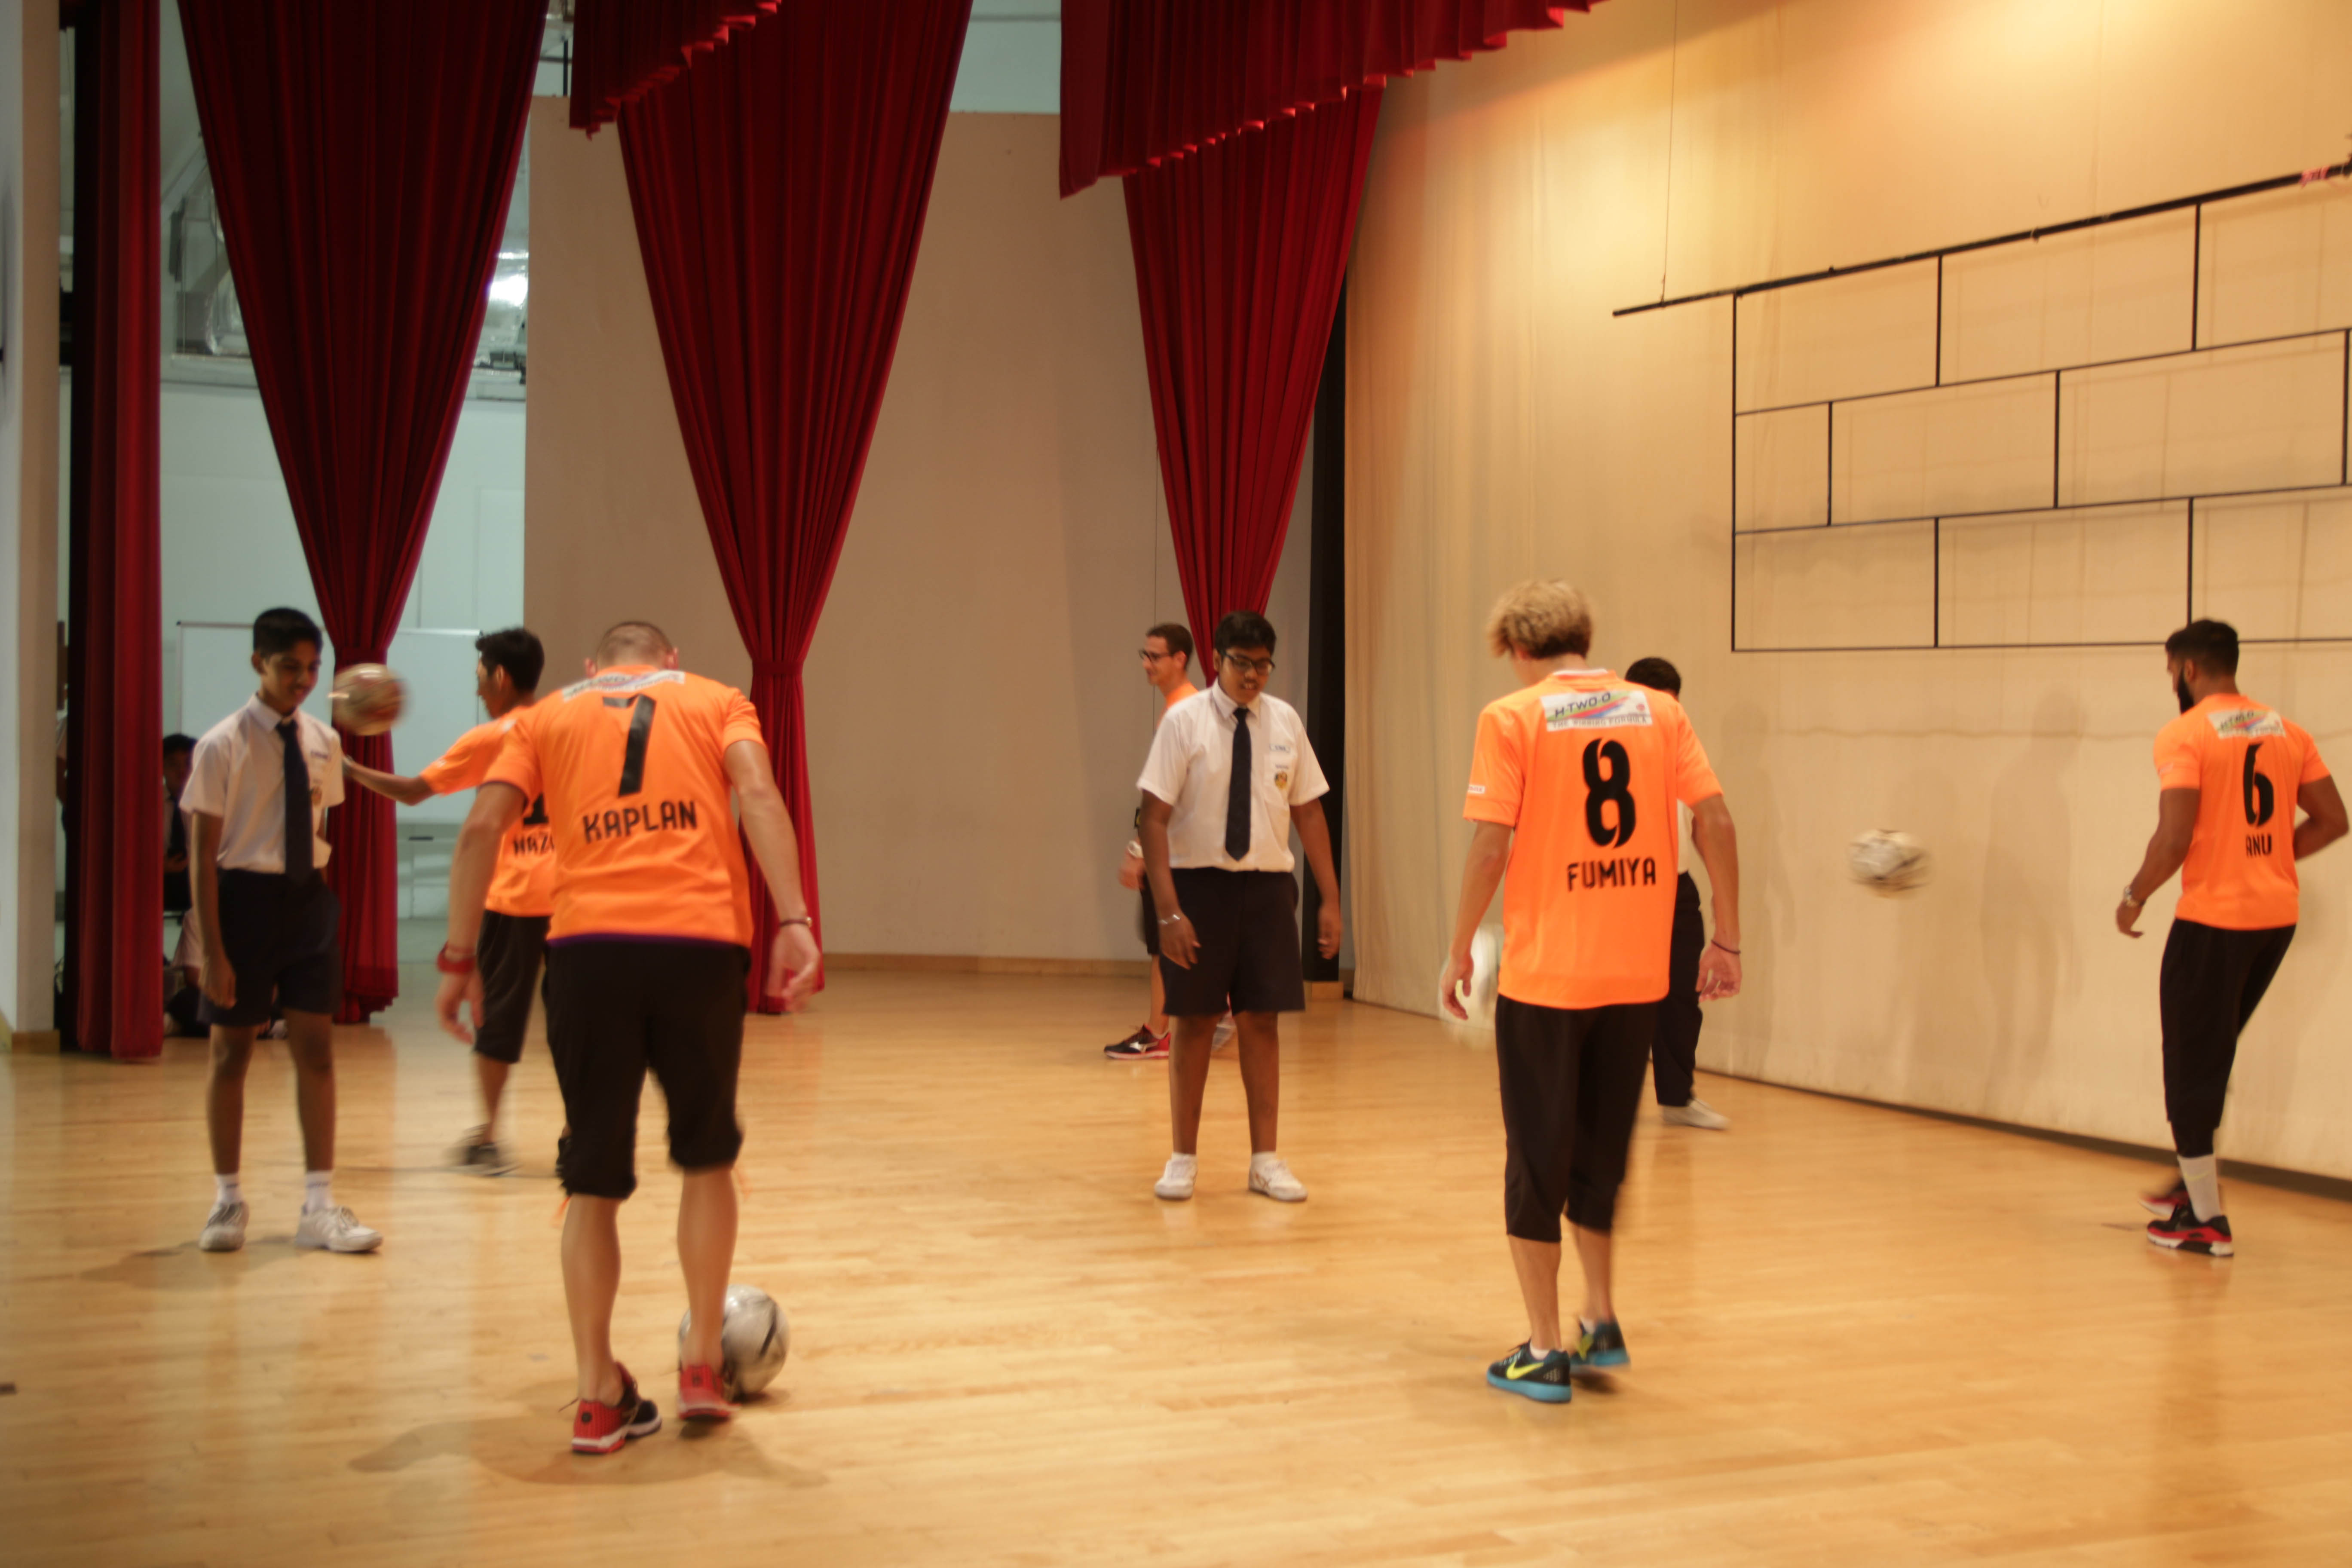 Students displaying their keepy-ups skill with the players.